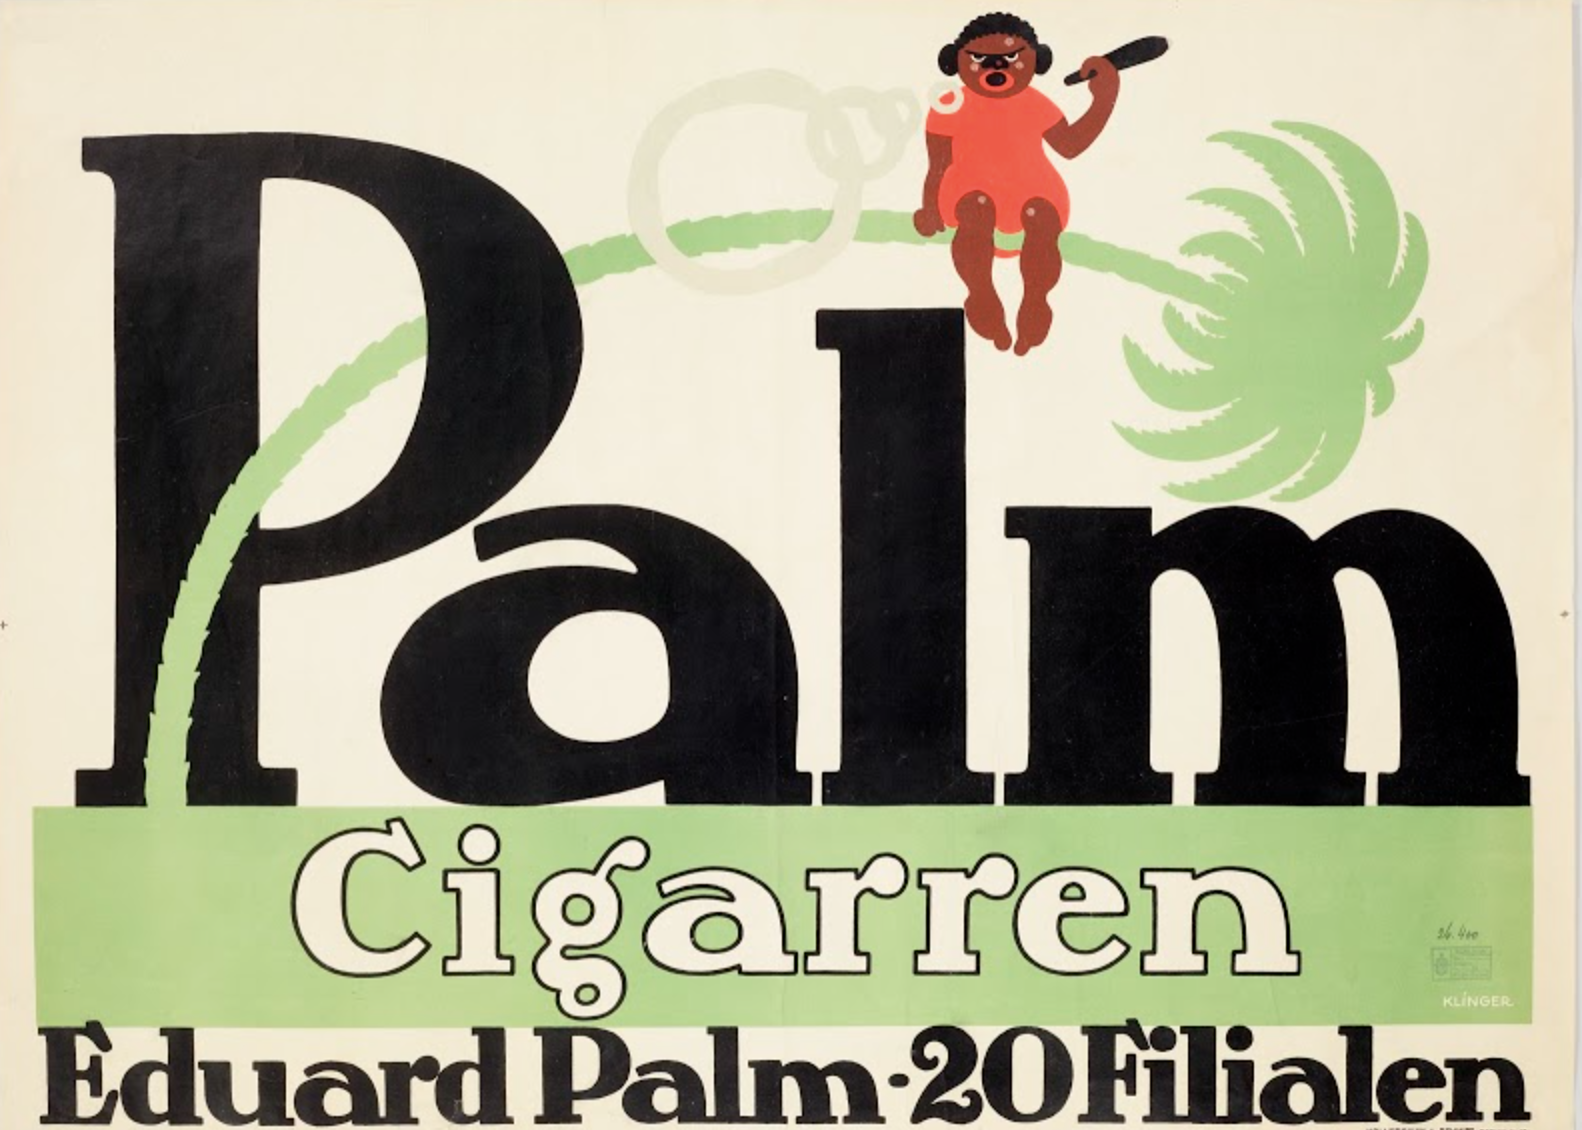 lithographic poster of a black figure sitting atop a bent palm tree smoking a cigar